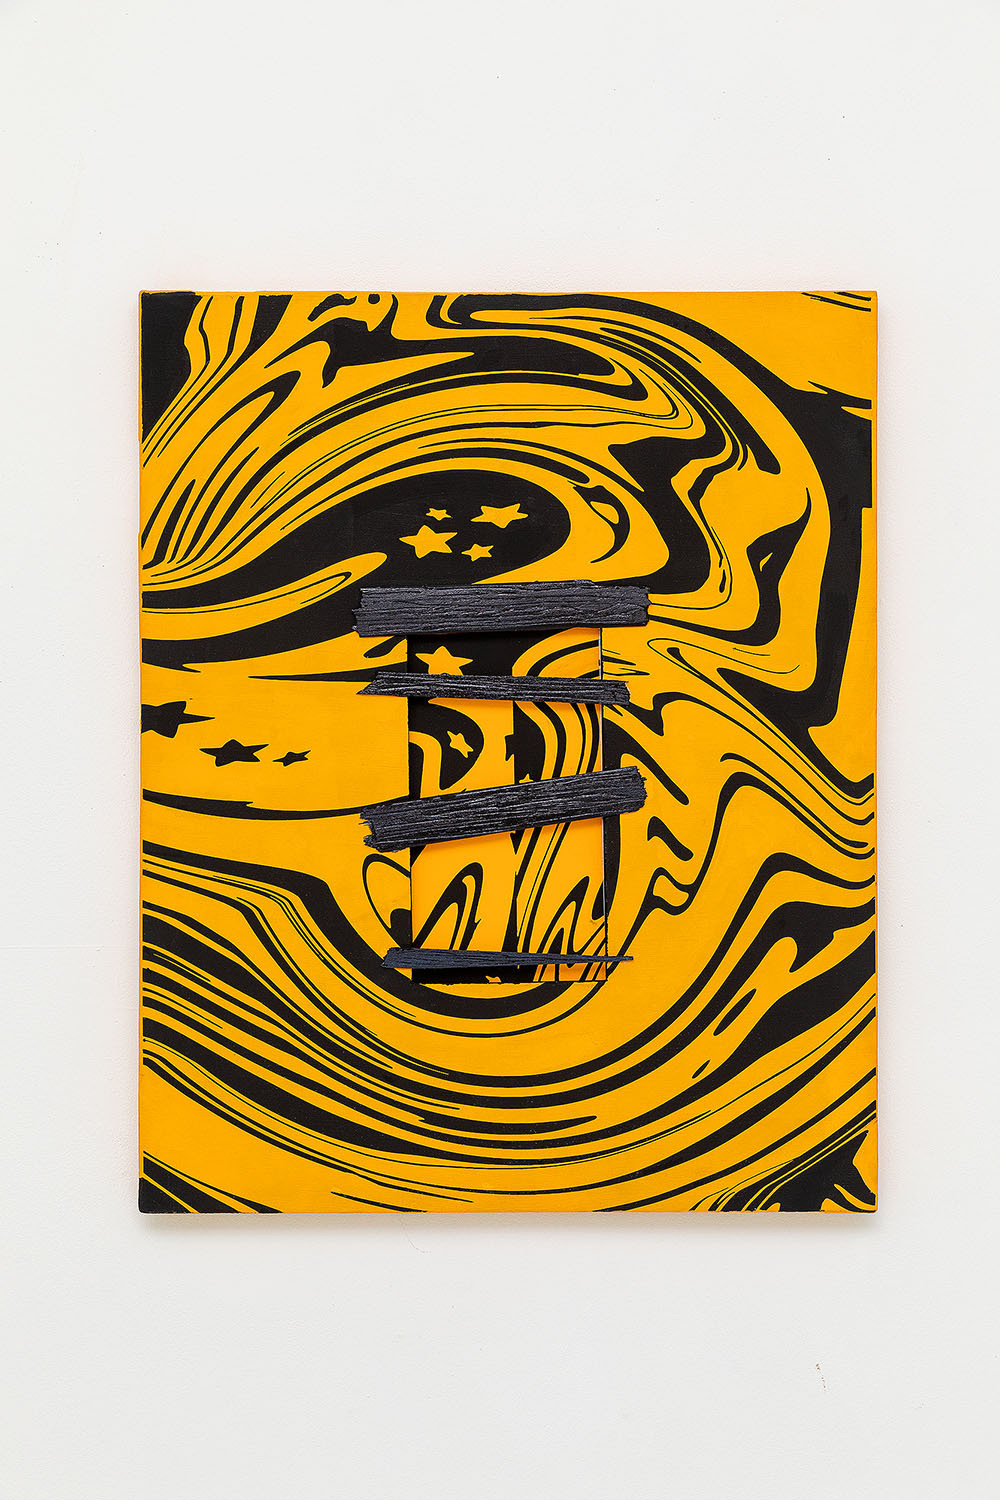 Charlotte Houette, Untitled (Yellow), 2022, acrylic on canvas, 60,5 x 75 cm